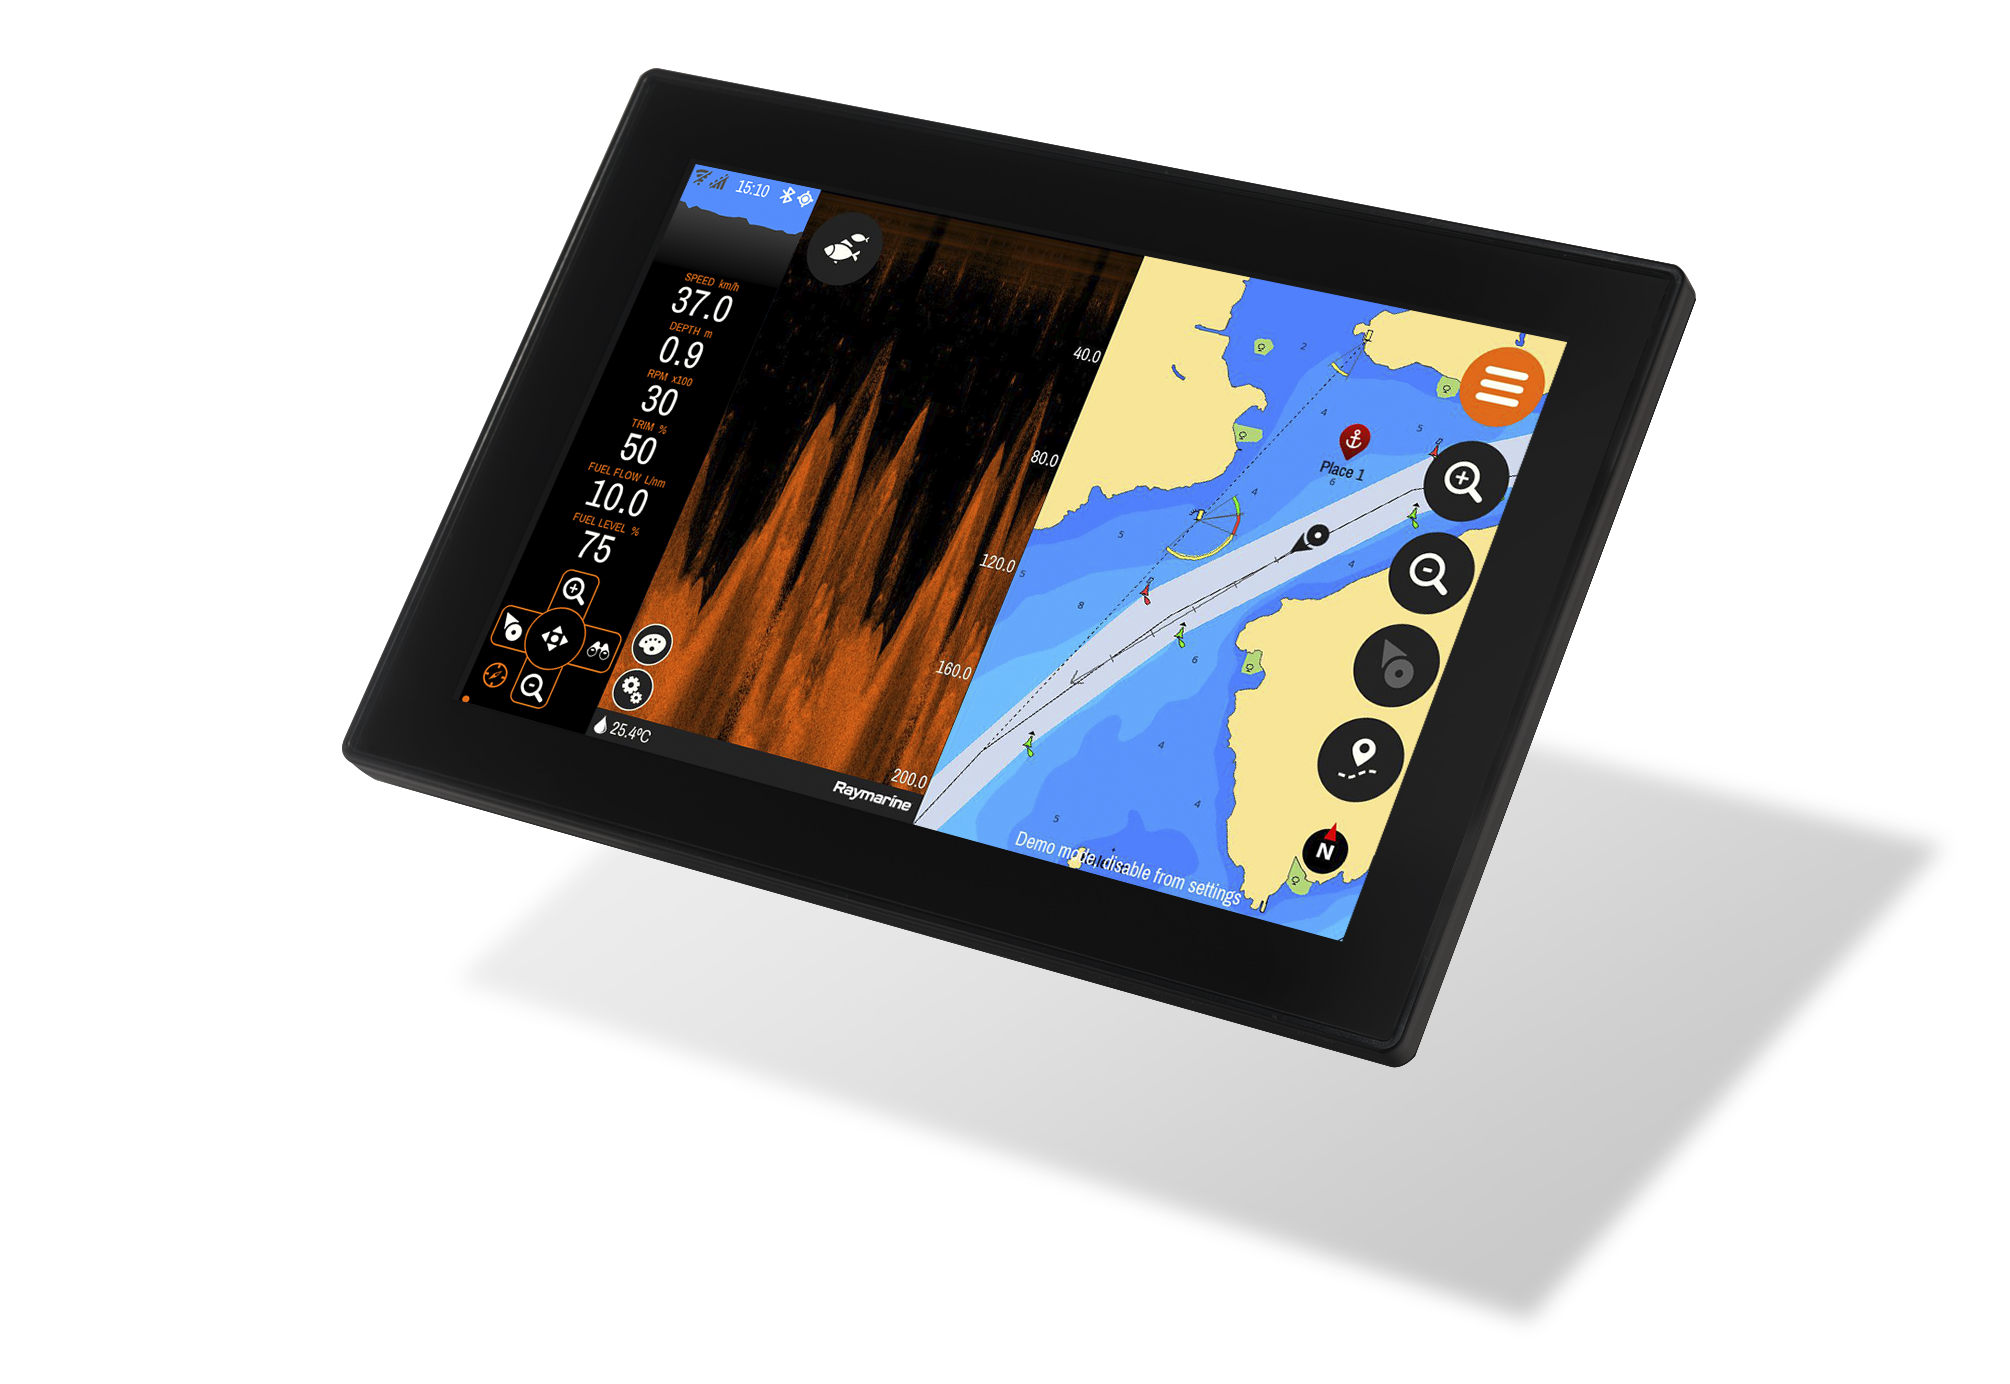 Q and Raymarine in cooperation – fishfinder available for the summer 2017